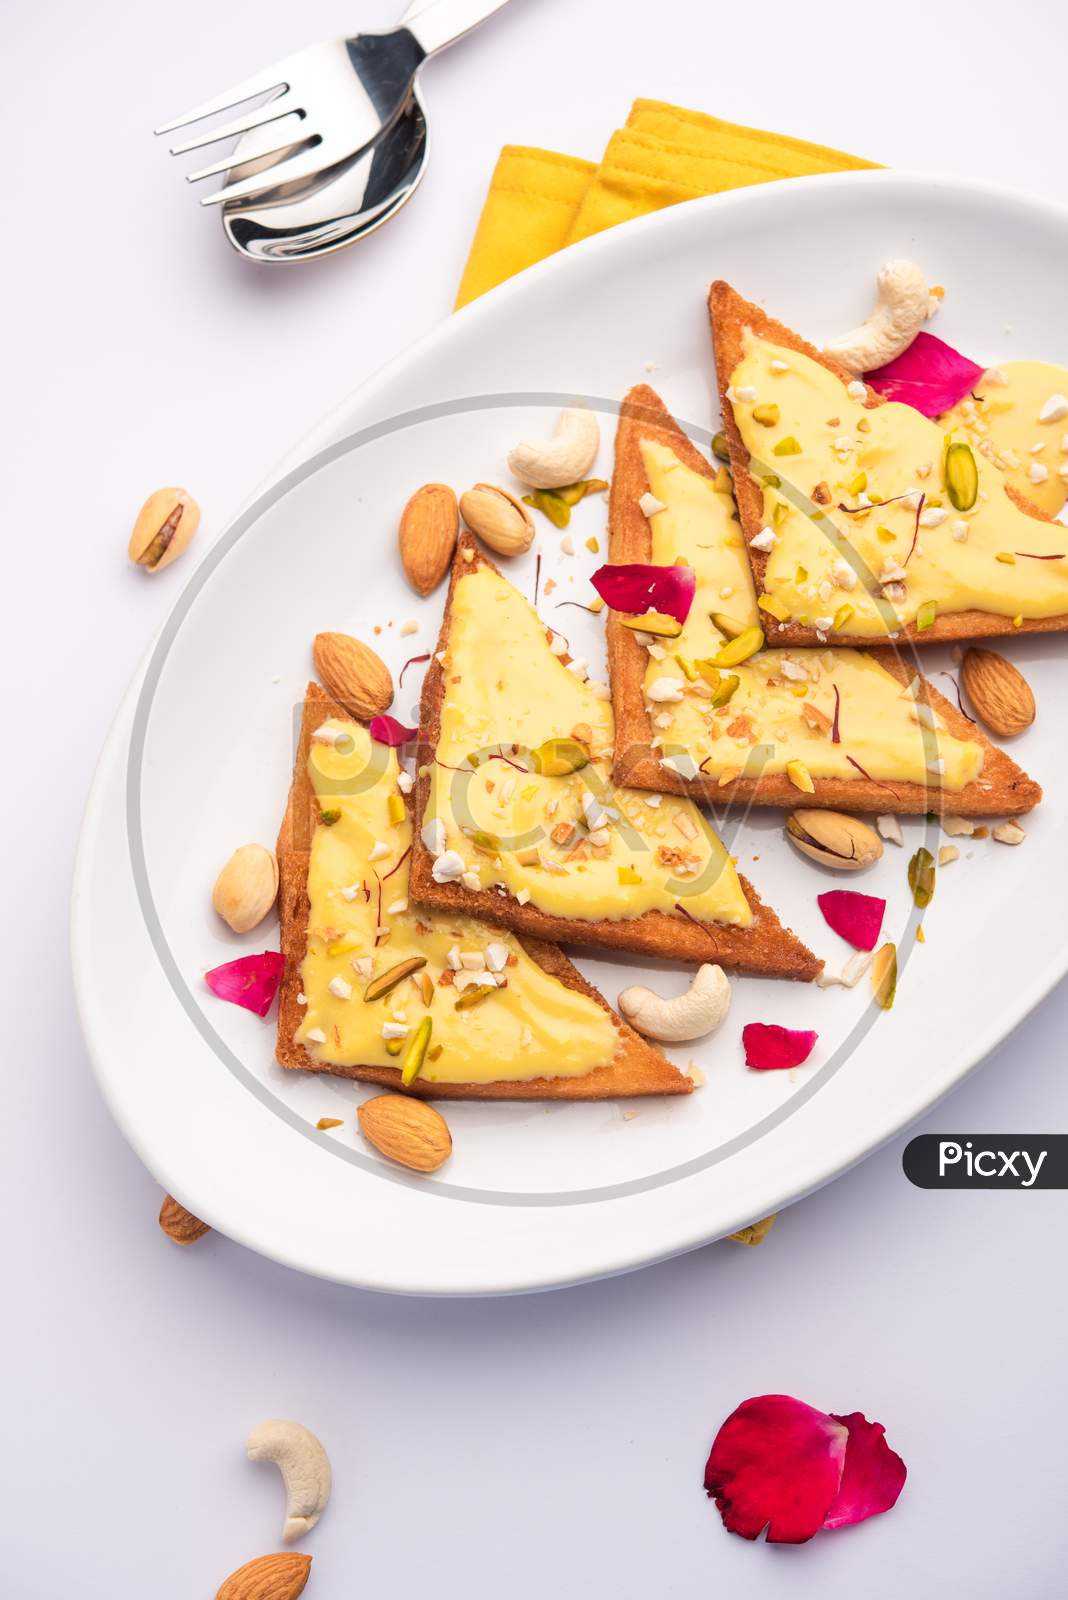 Shahi Tukda Or Tukra Also Known As Double Ka Meetha Is A Rich & Festive Indian Dessert Made With Bread, Ghee, Sugar, Milk And Nuts